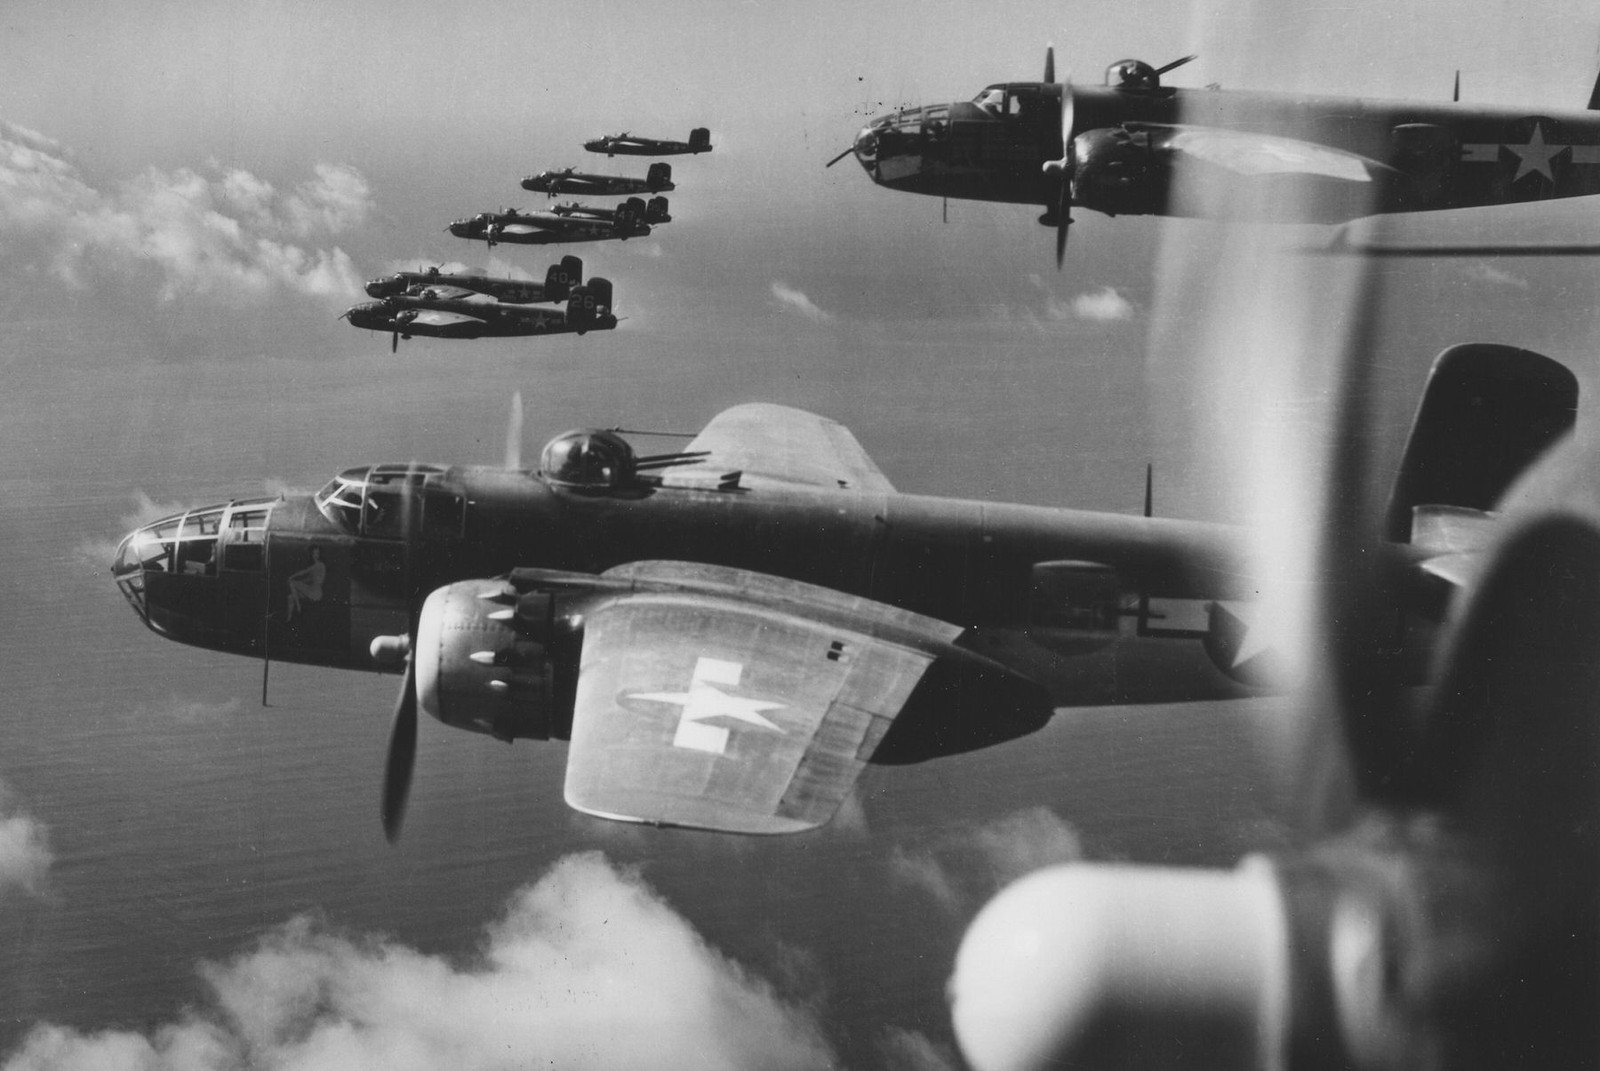 B-25 bombers in formation.